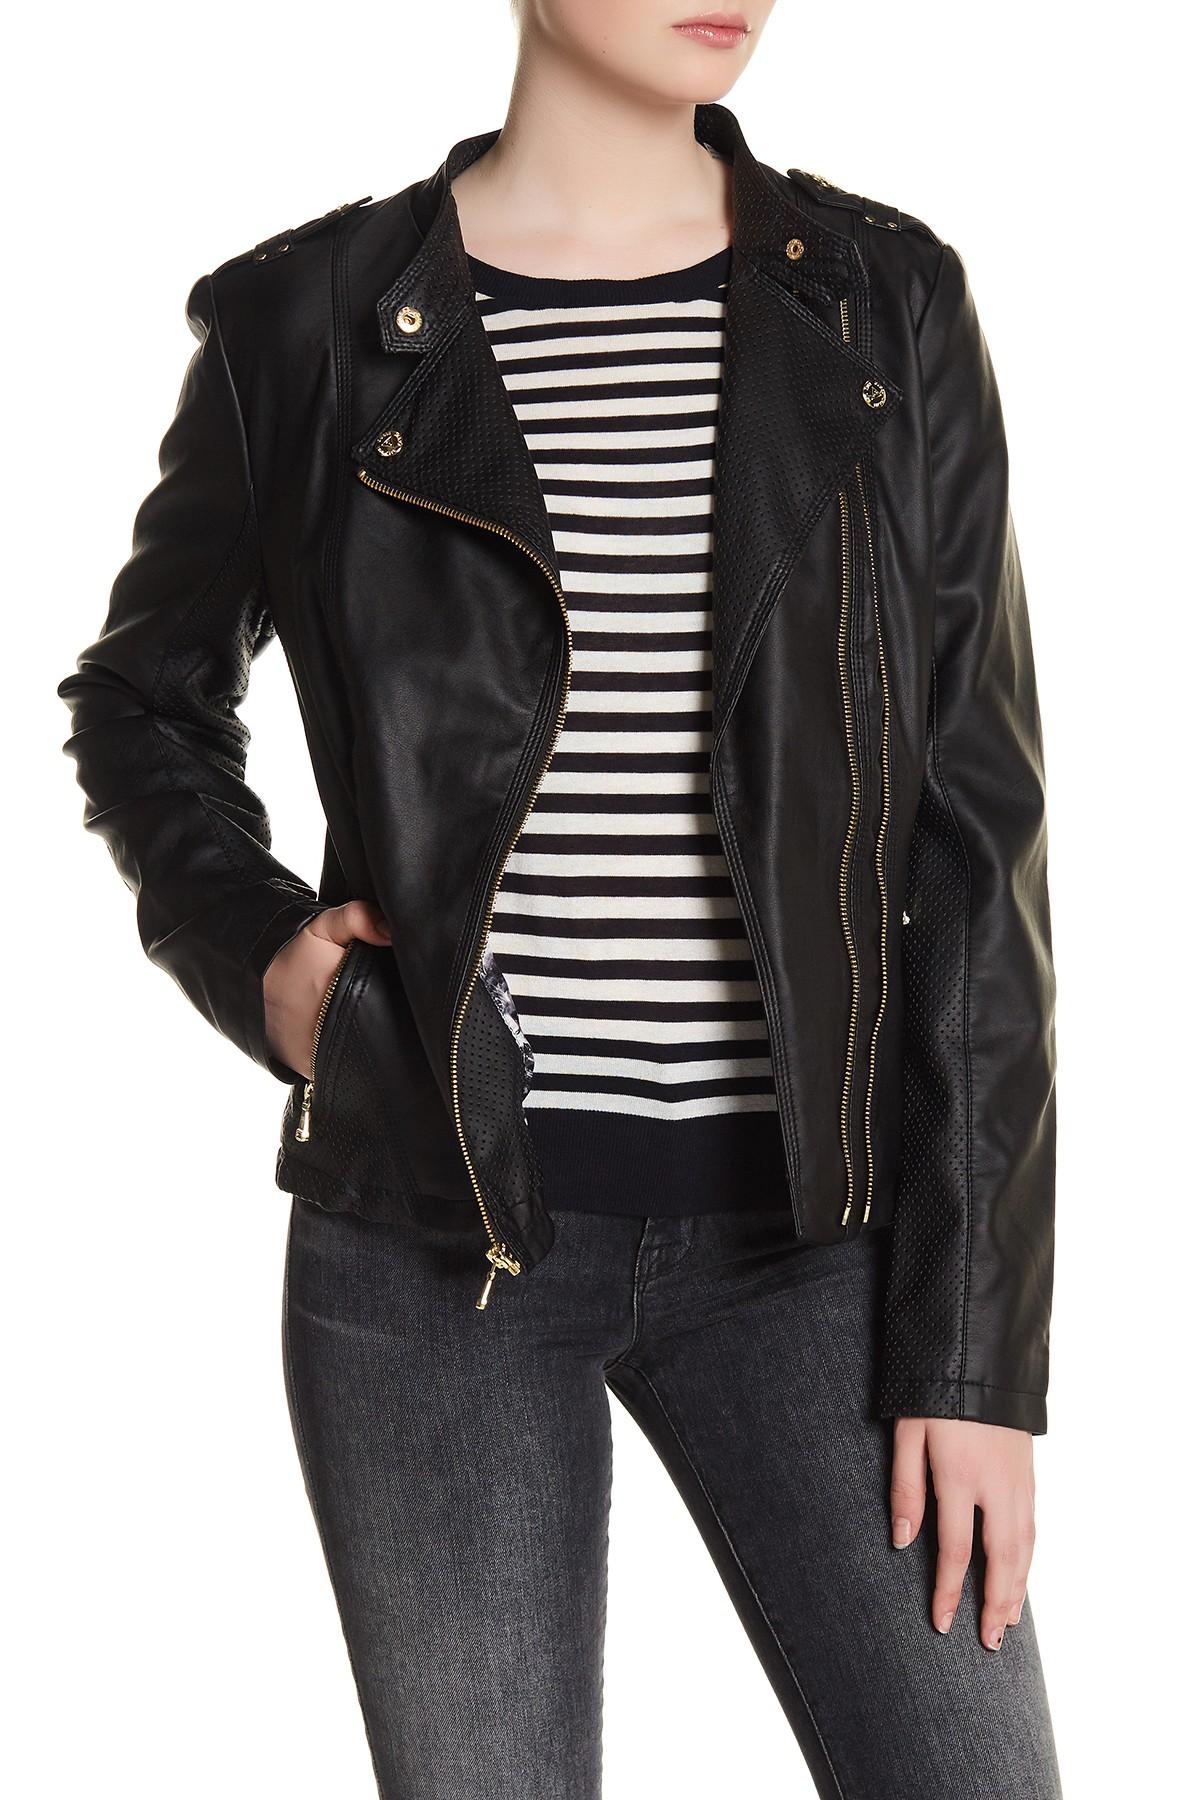 Guess Synthetic Faux Leather Jacket in Black - Lyst